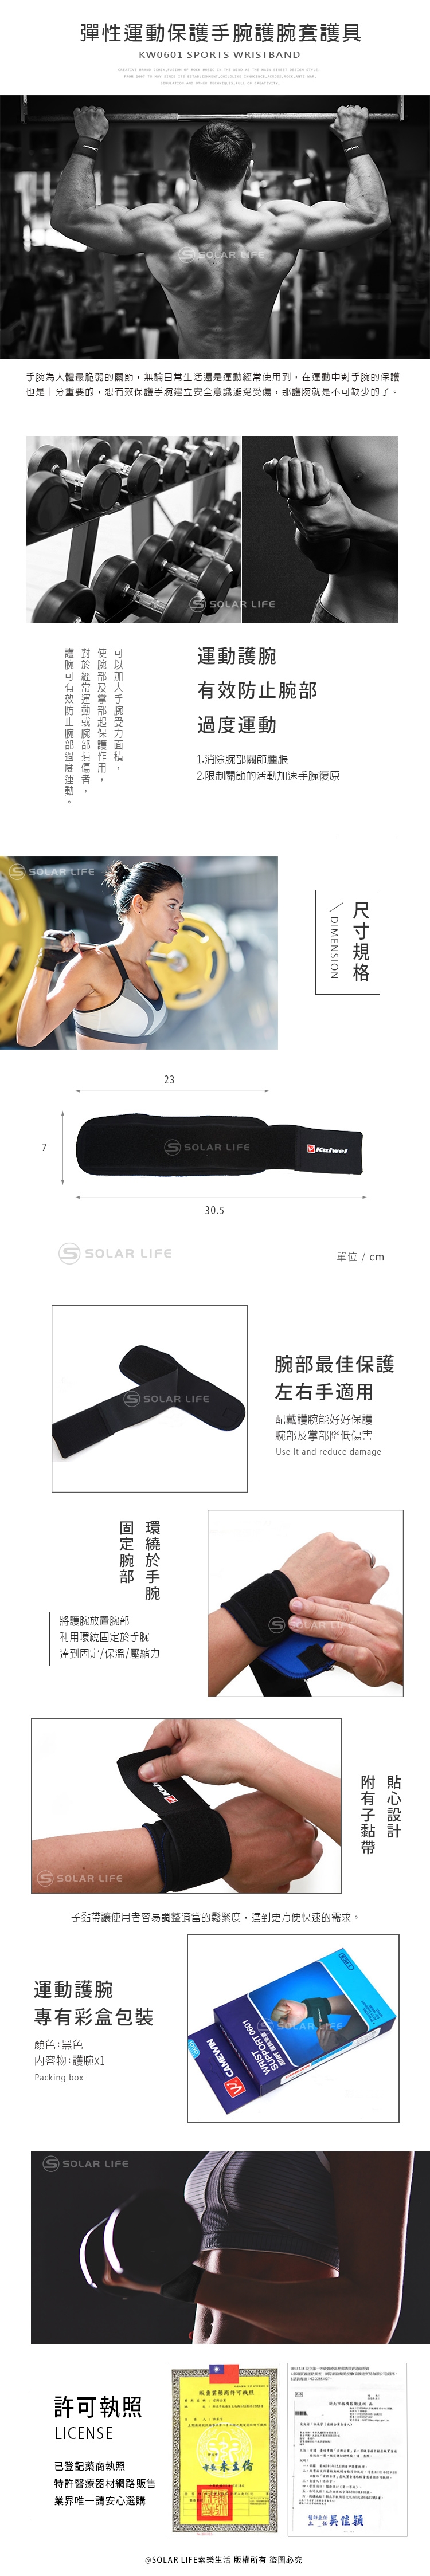 introduction-of-sport-wristband